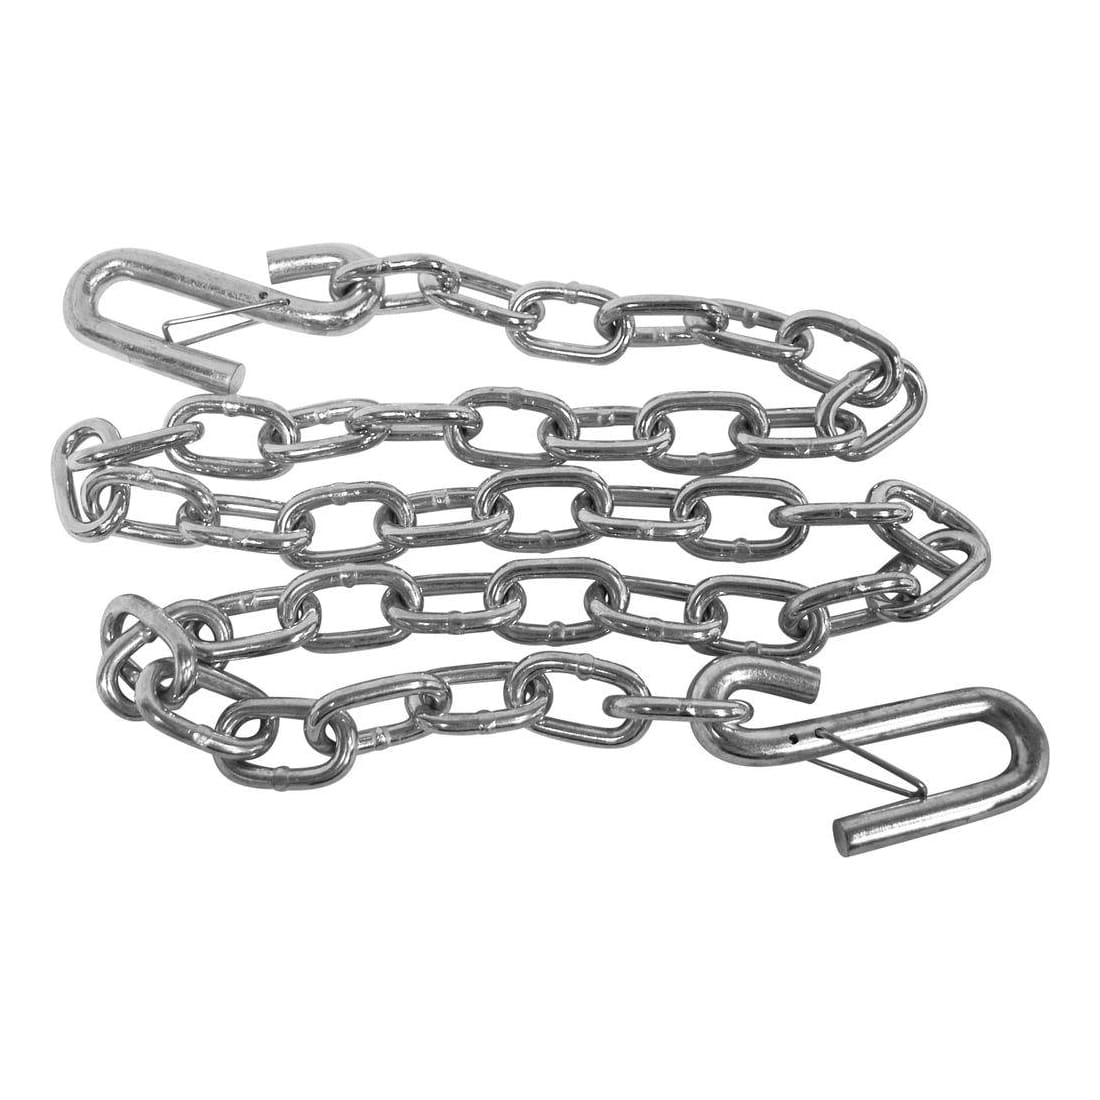 Attwood Class II Trailer Safety Chains